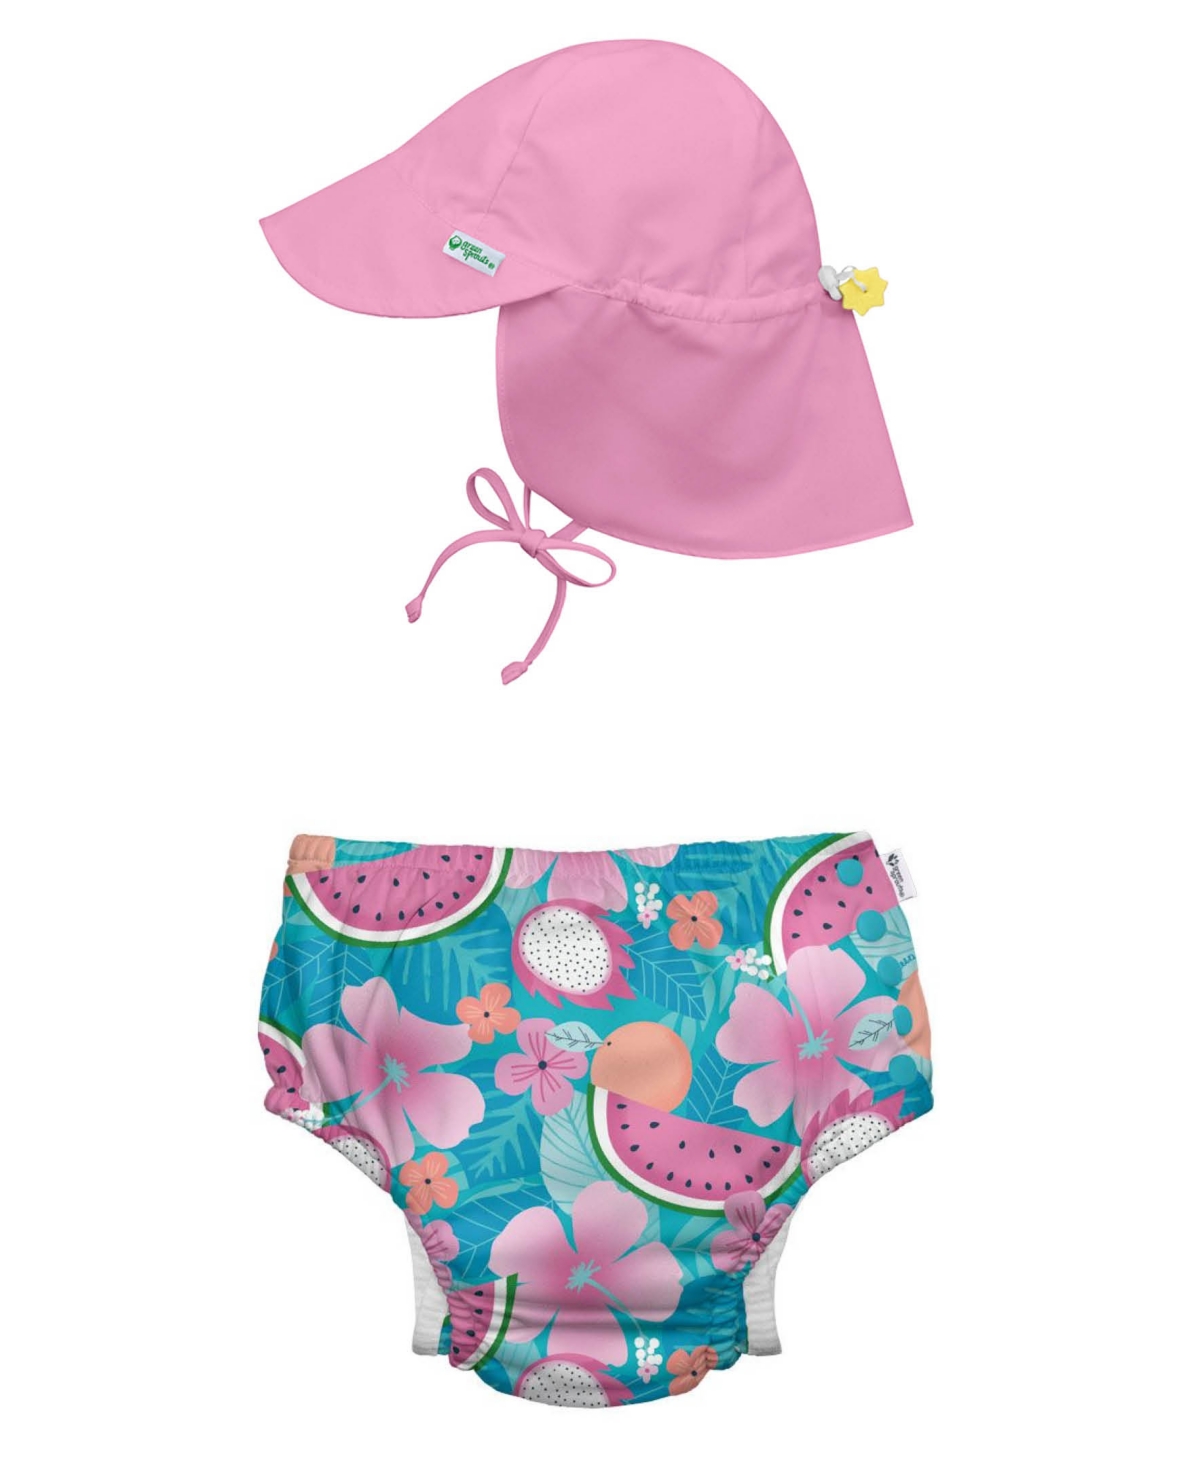 Green Sprouts Kids' Baby Boys Or Baby Girls Snap Swim Diaper And Flap Hat Upf 50, 2 Piece Set In Aqua Tropical Fruit Floral